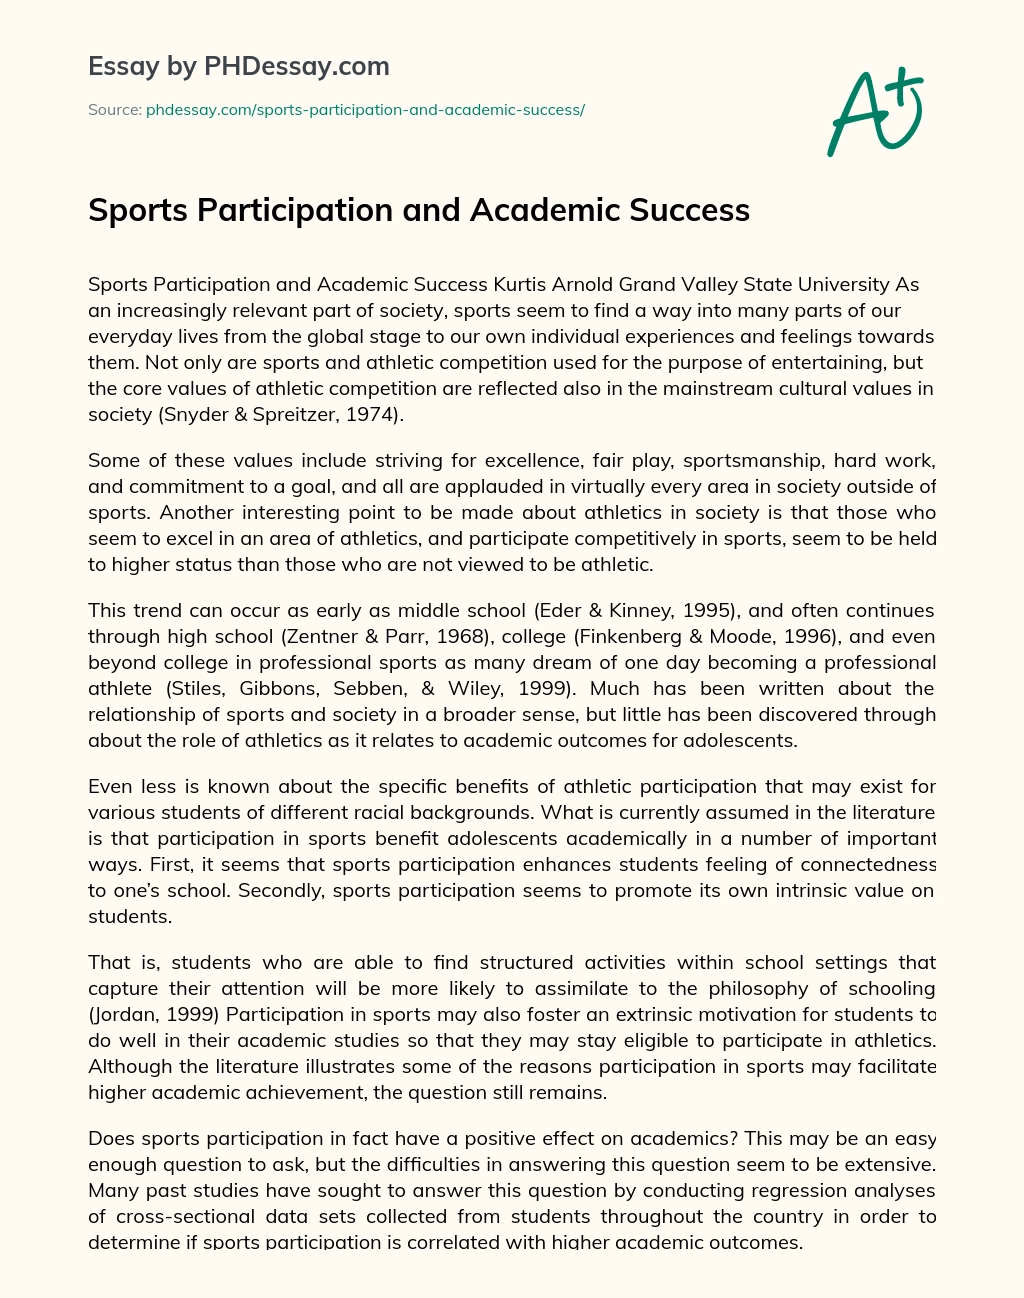 Sports Participation and Academic Success essay